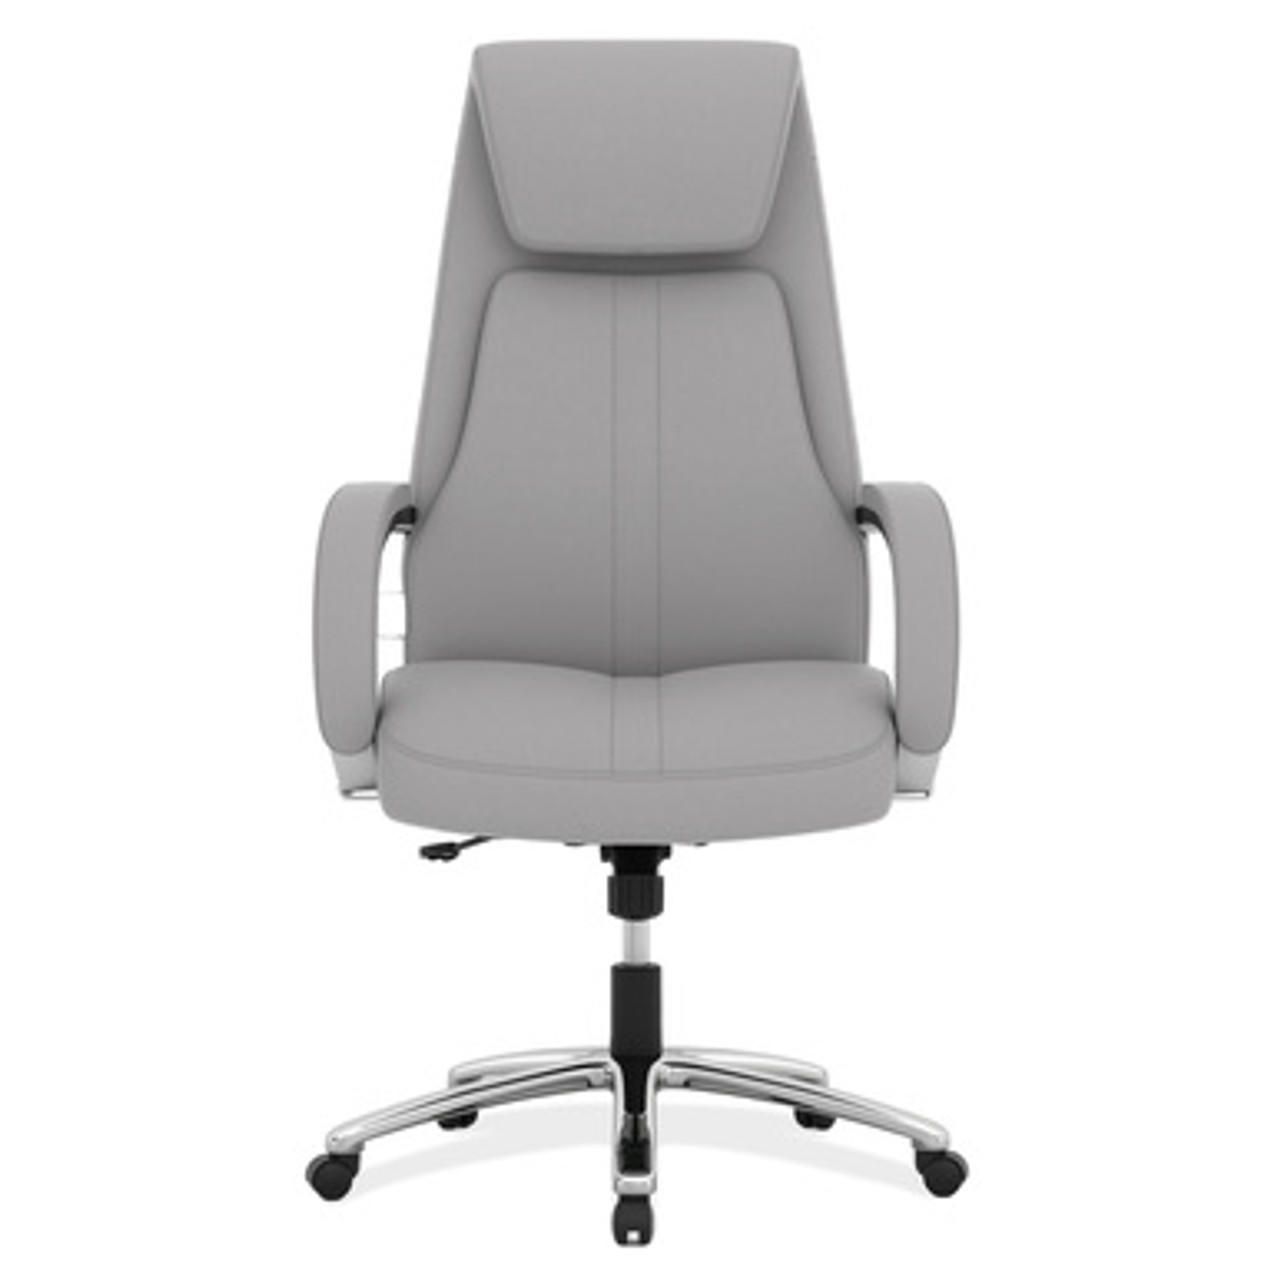  Office Source Bradley Antimicrobial Executive Conference Chair 74011A 